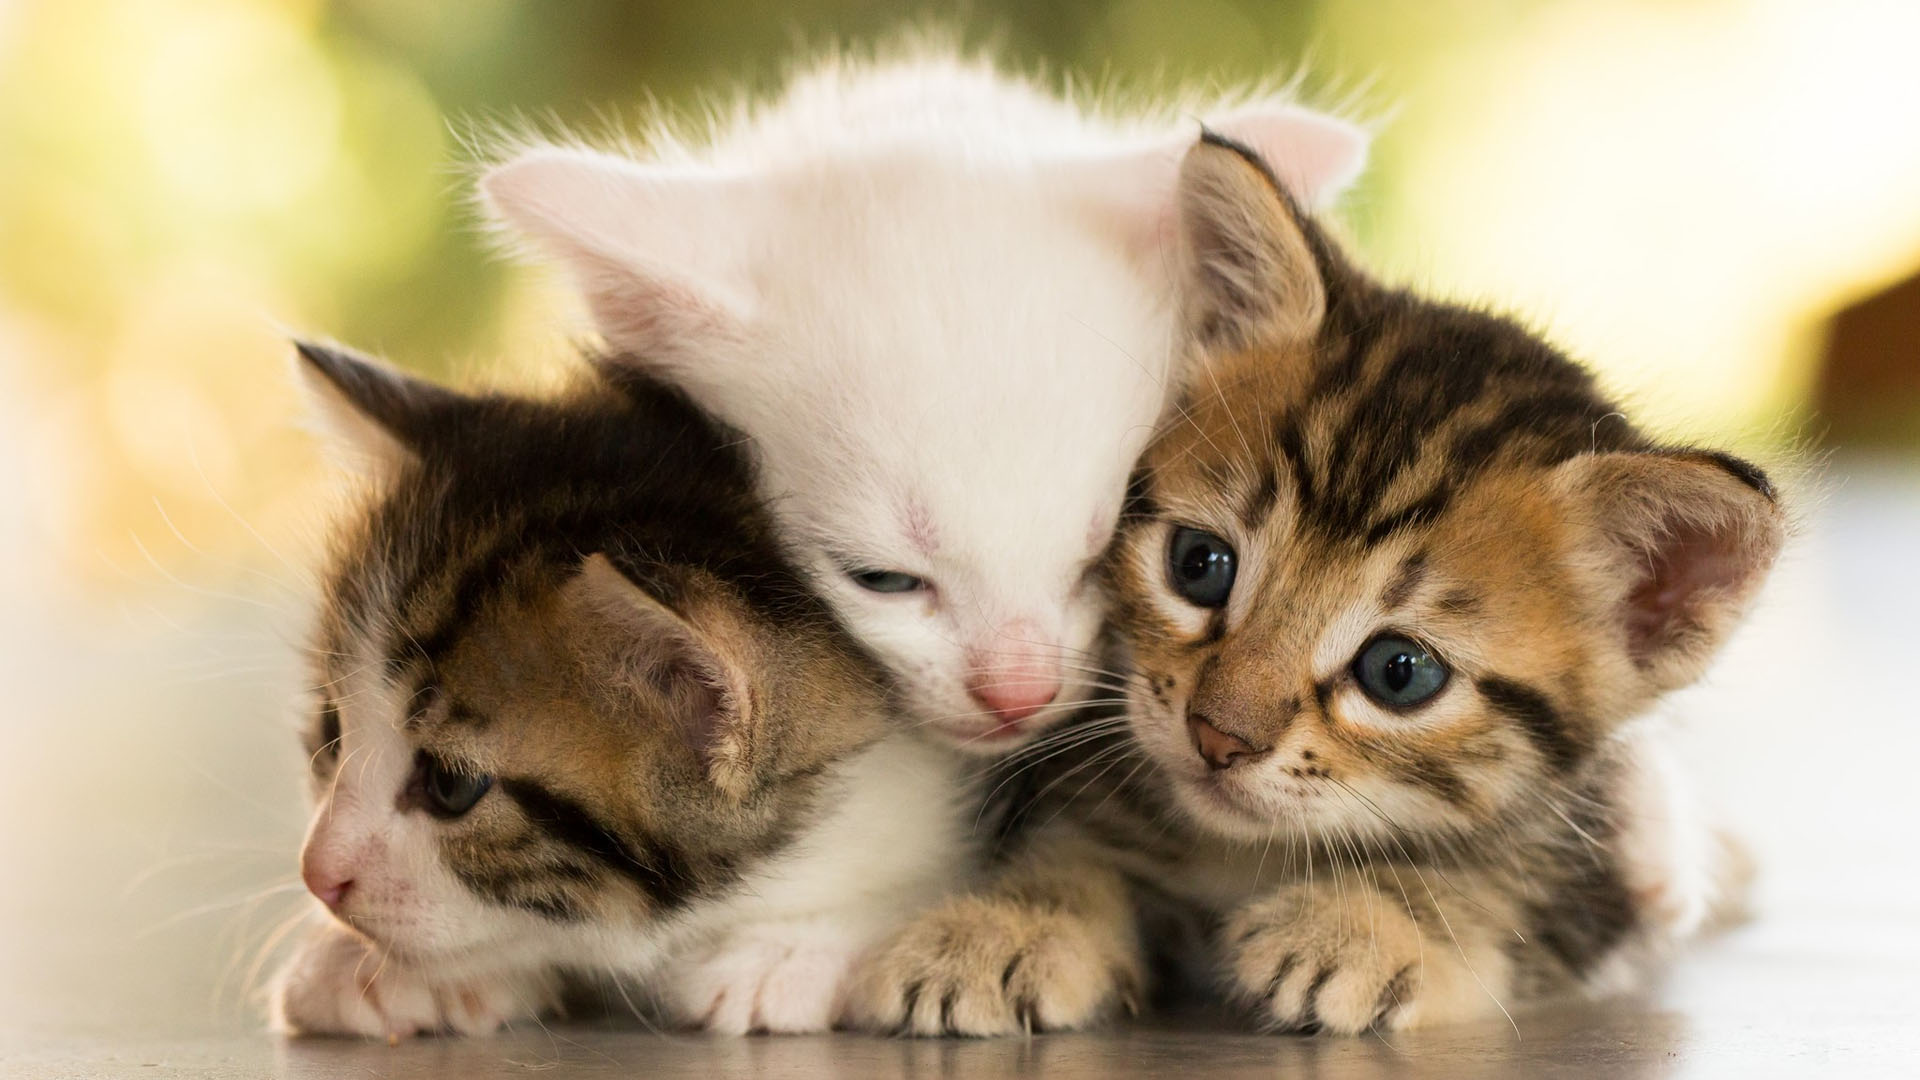 Cute Baby Cats Wallpaper Small Cat Couple Image HD